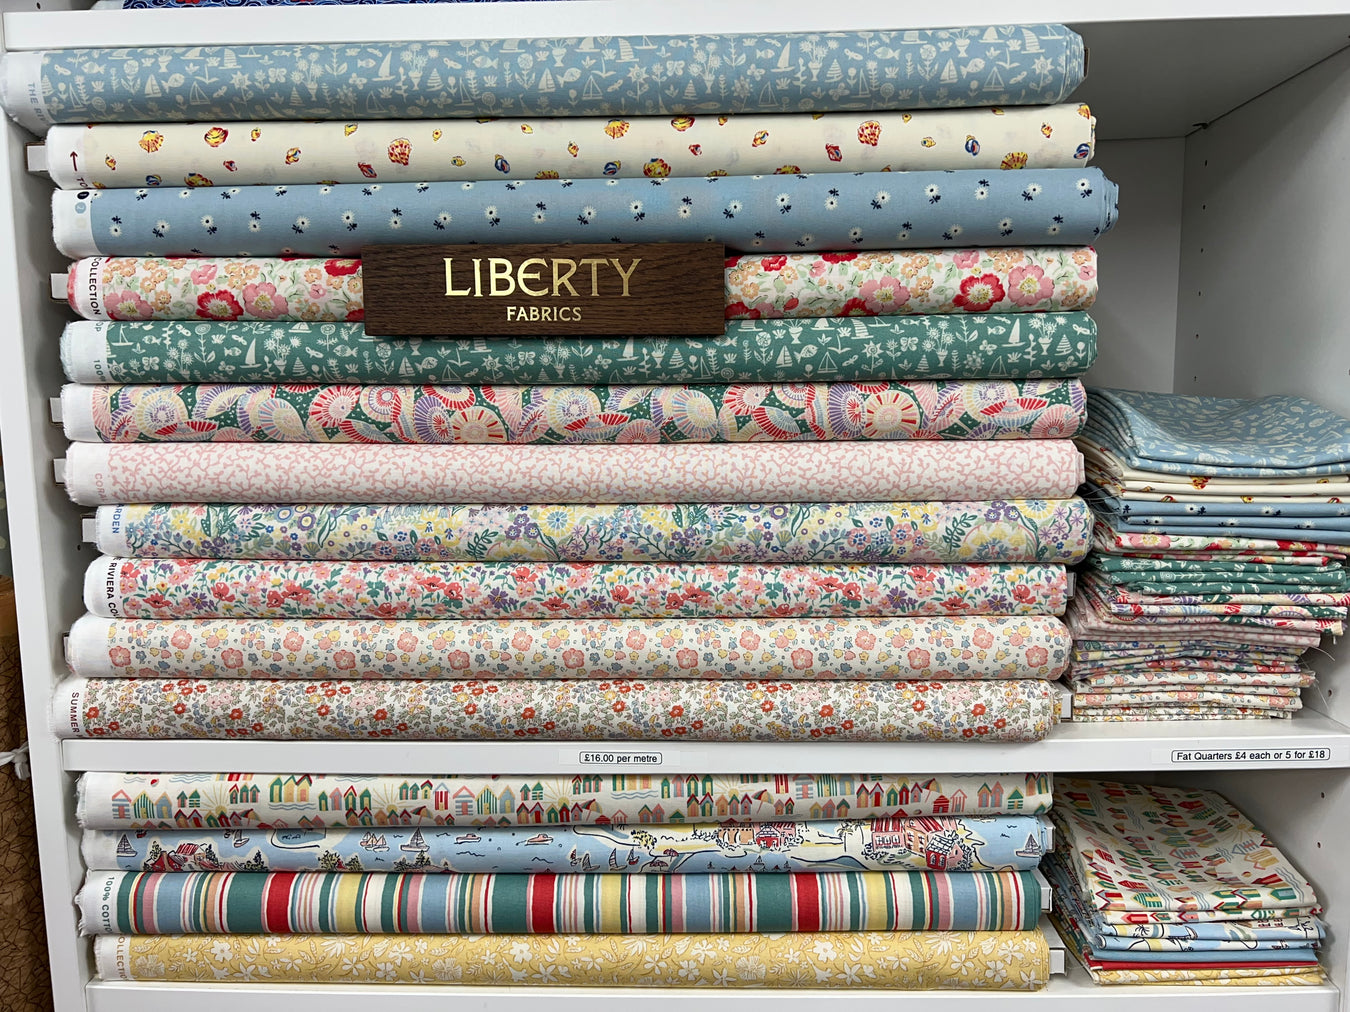 Stack of patterned liberty fabric bolts